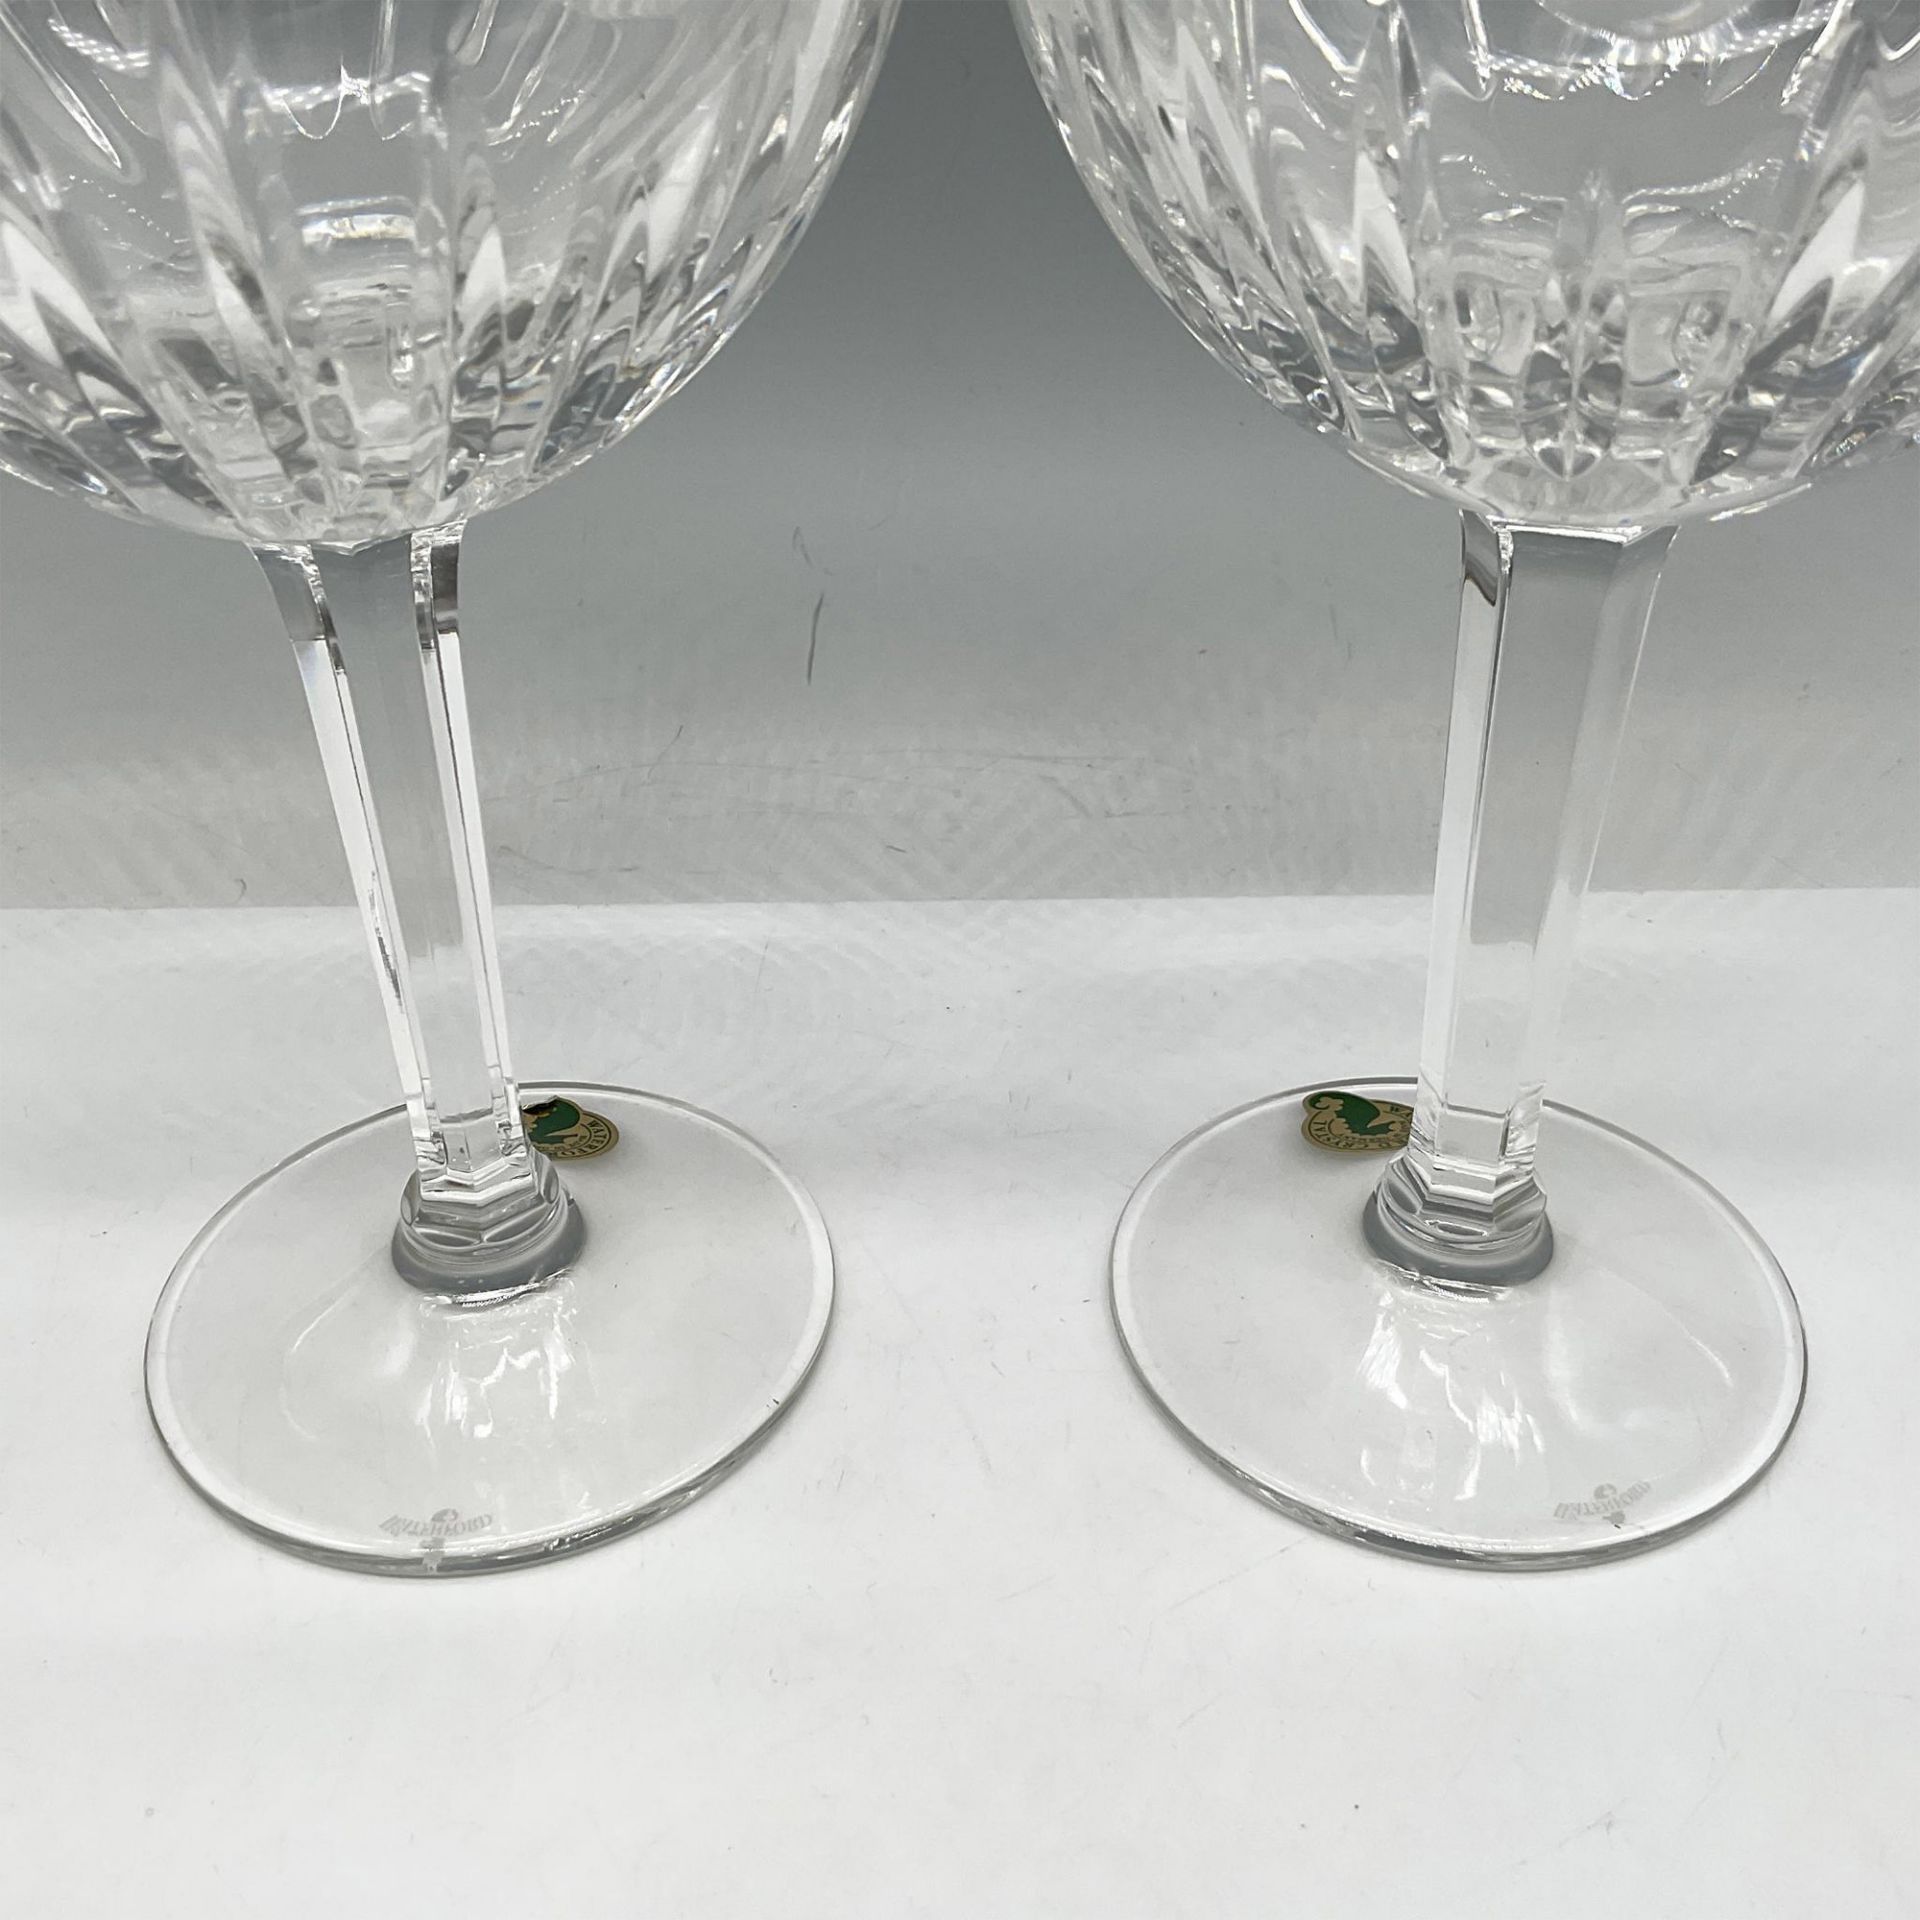 2pc Waterford Crystal Toasting Goblets, Millenium Love - Image 4 of 4